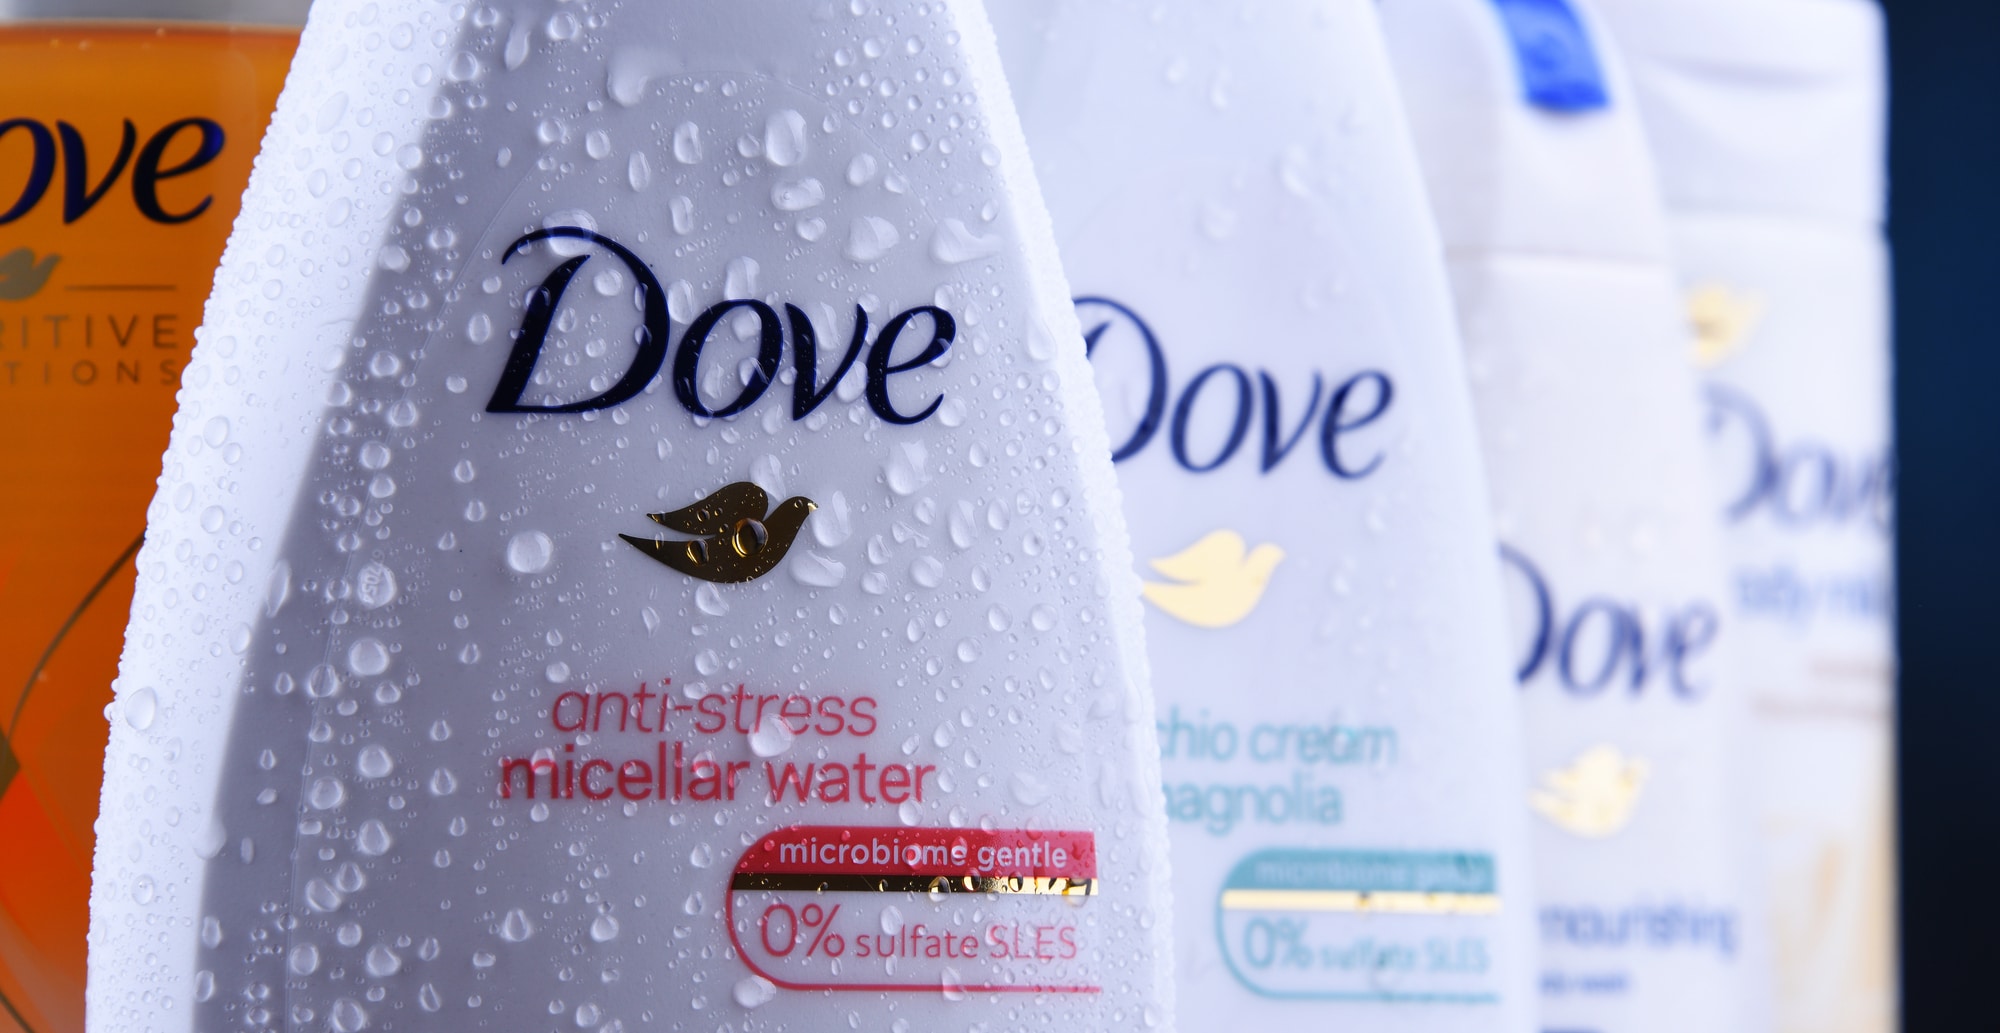 20-facts-about-dove